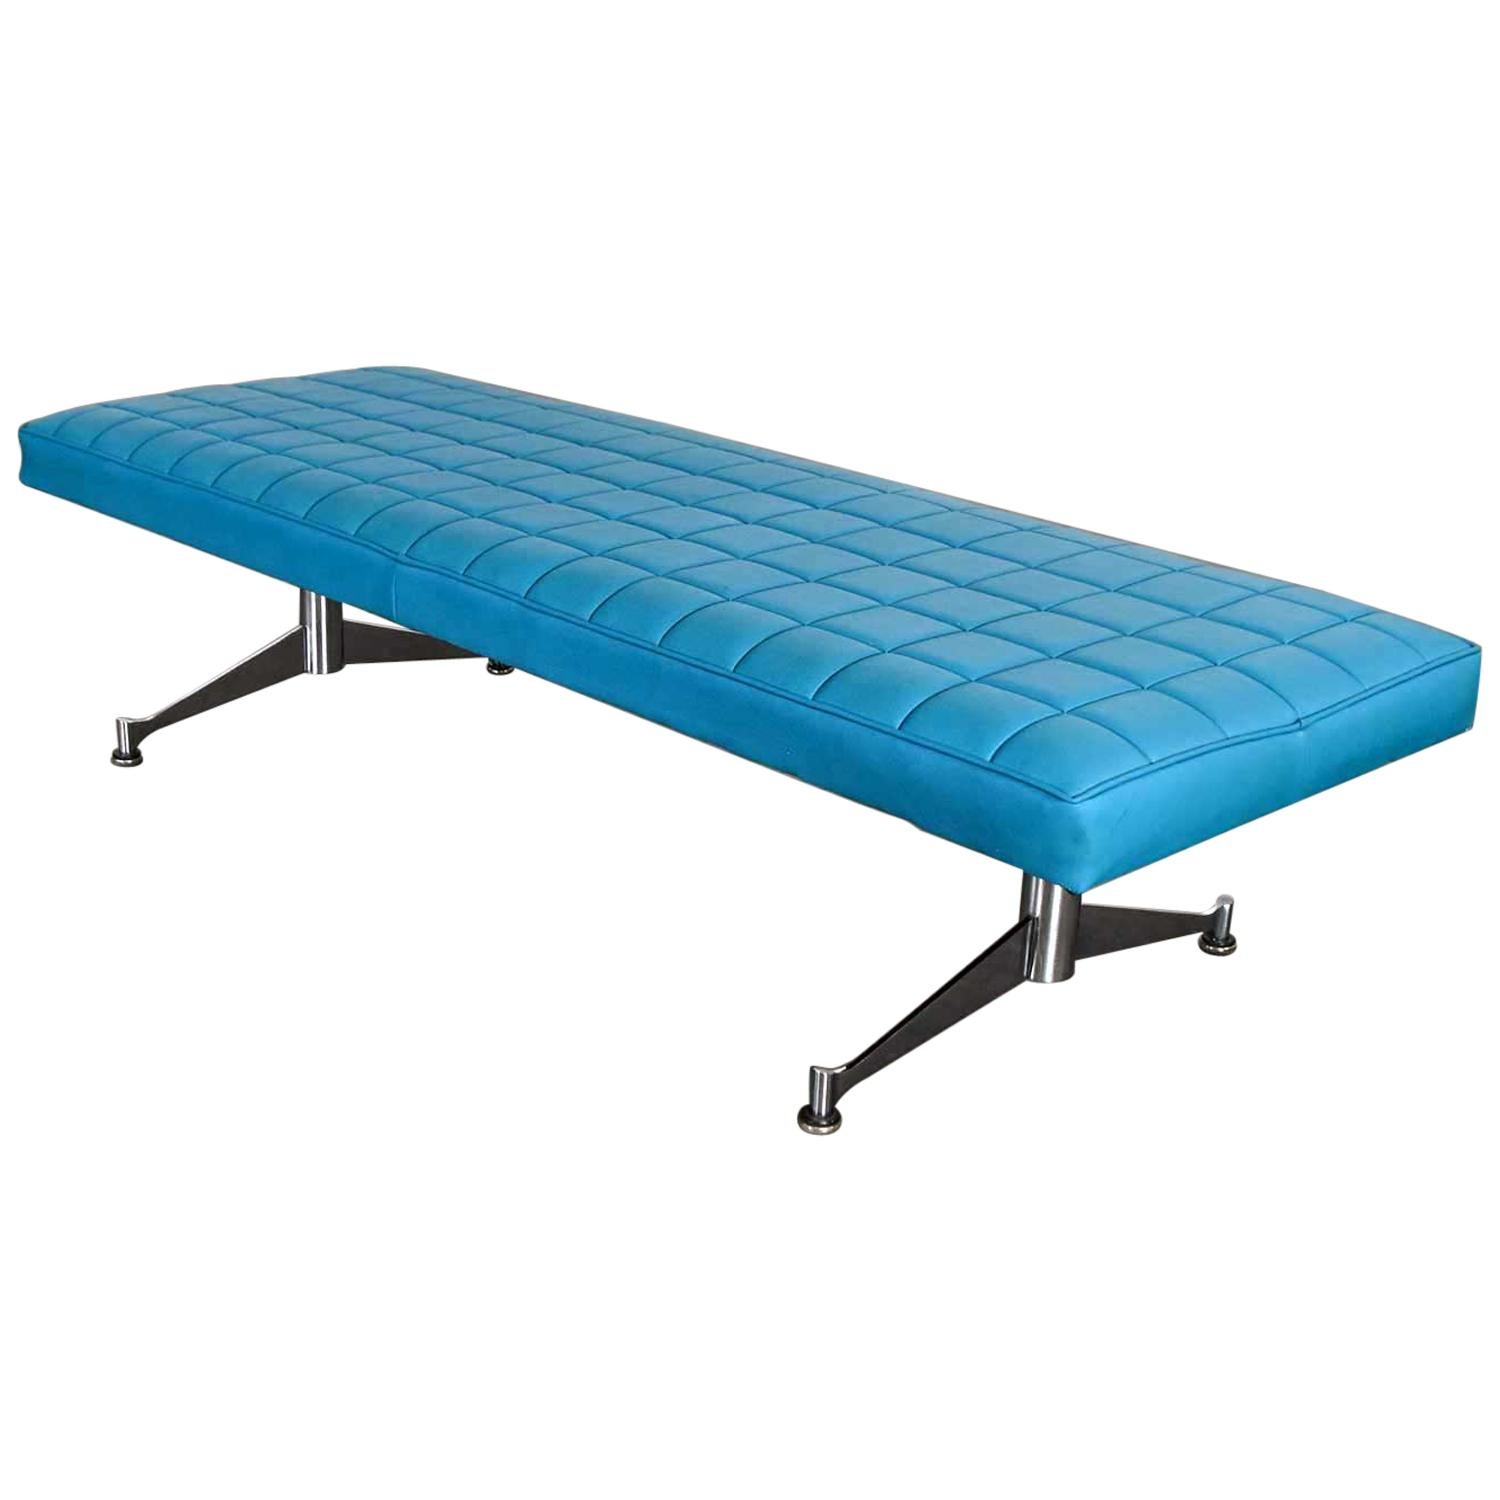 Madison Furn. Vinyl Faux Leather Turquoise Chrome Bench Daybed Style A. Umanoff